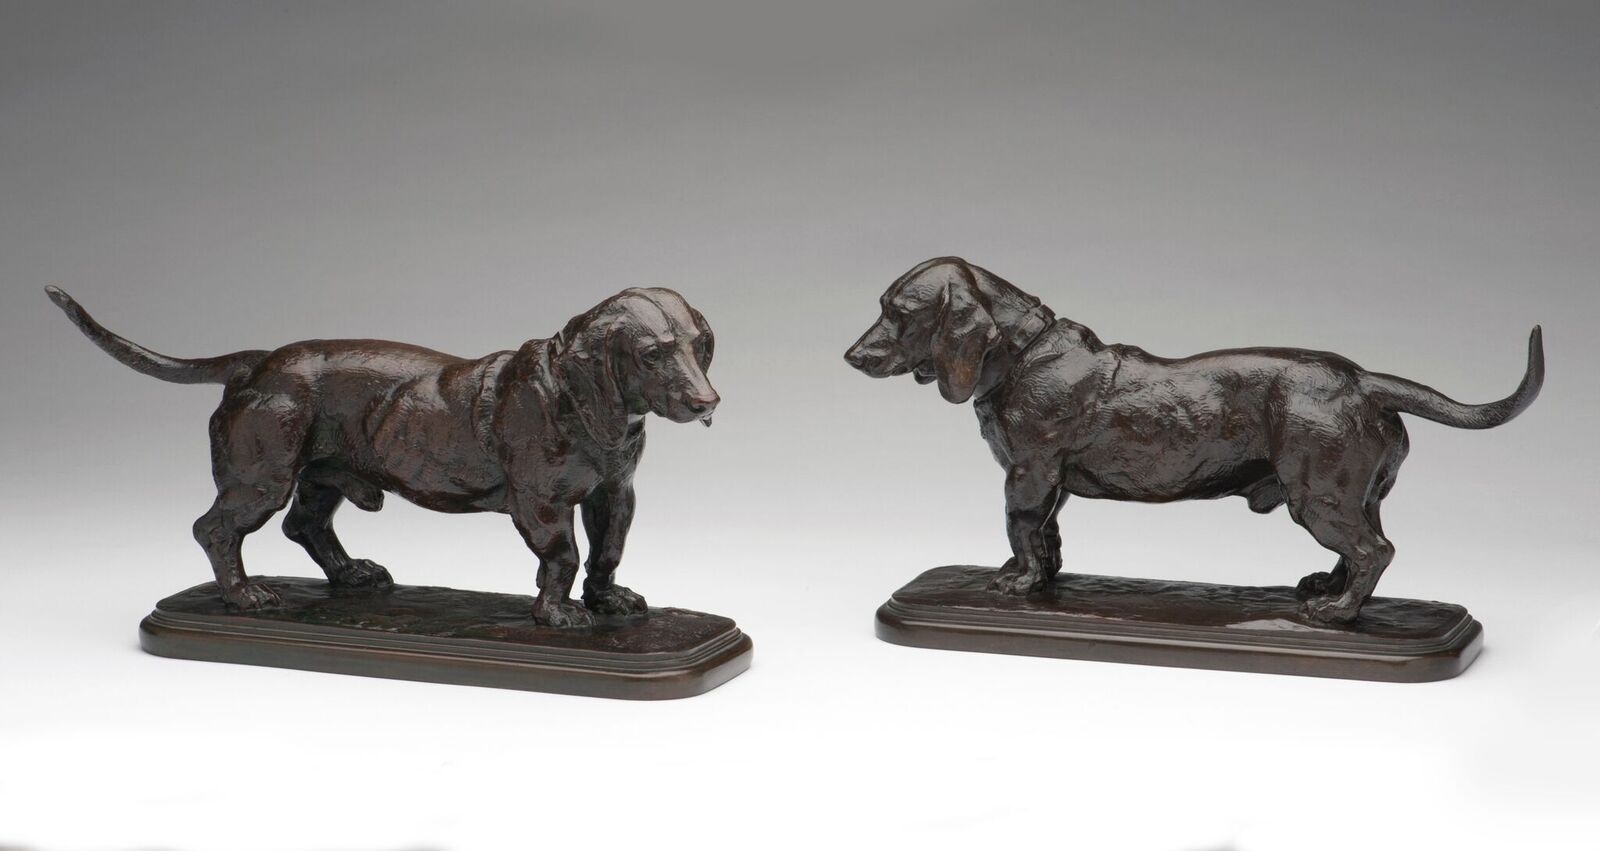 Pair of Basset Hounds, c. 1860